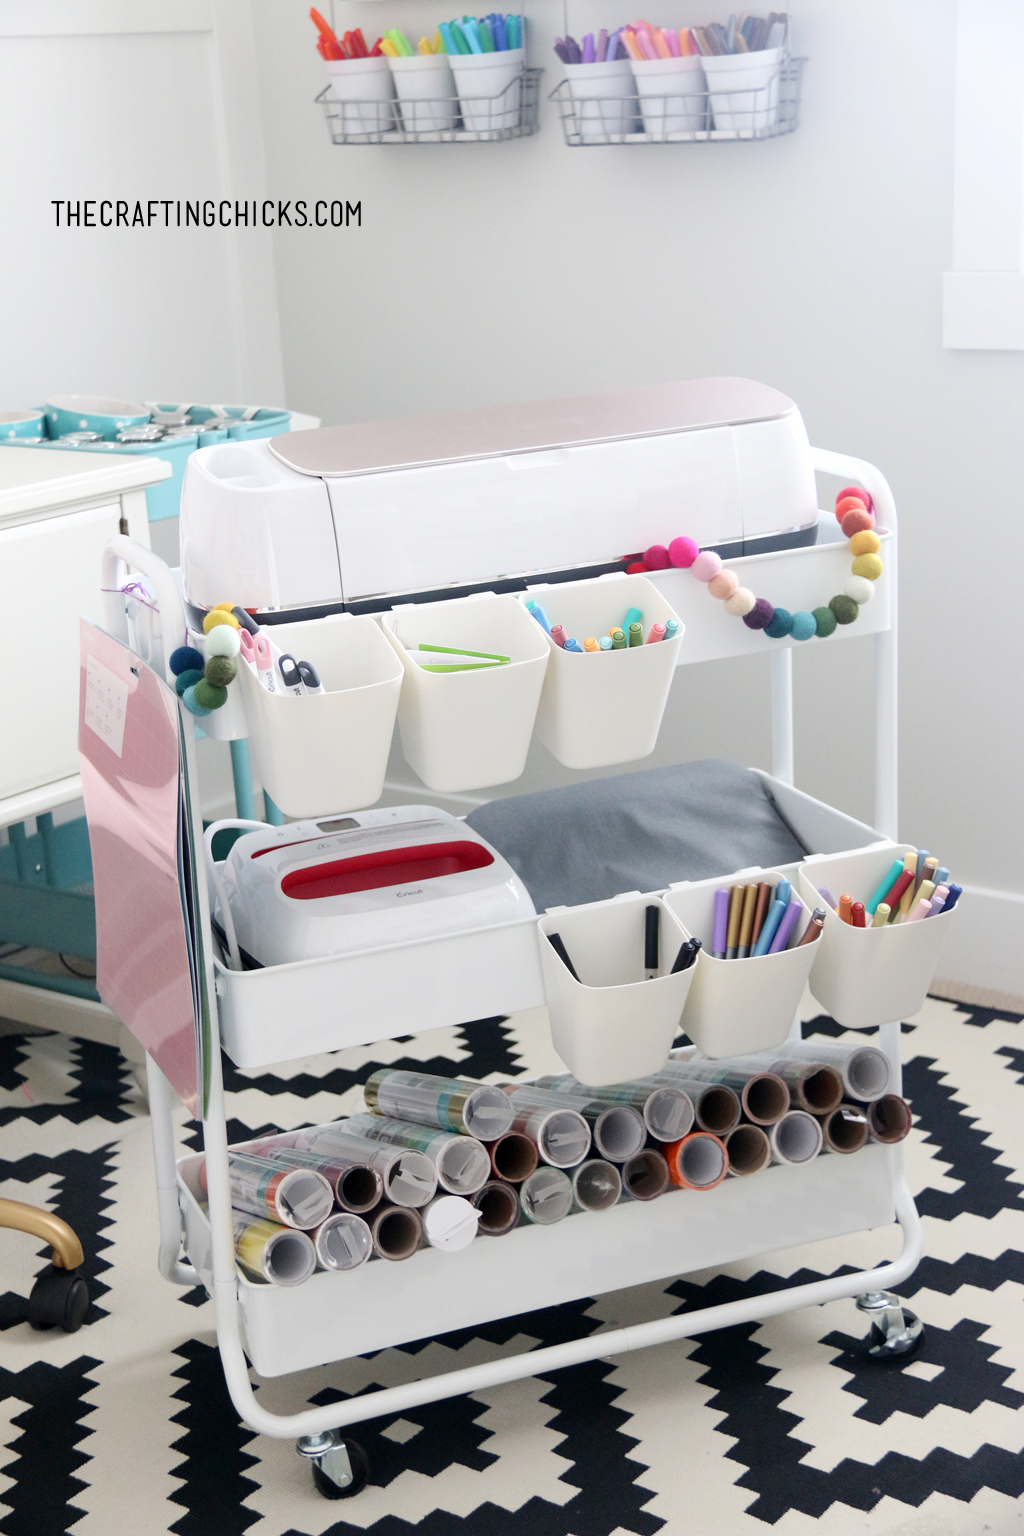 Cricut Craft Cart from Origami - The Kingston Home